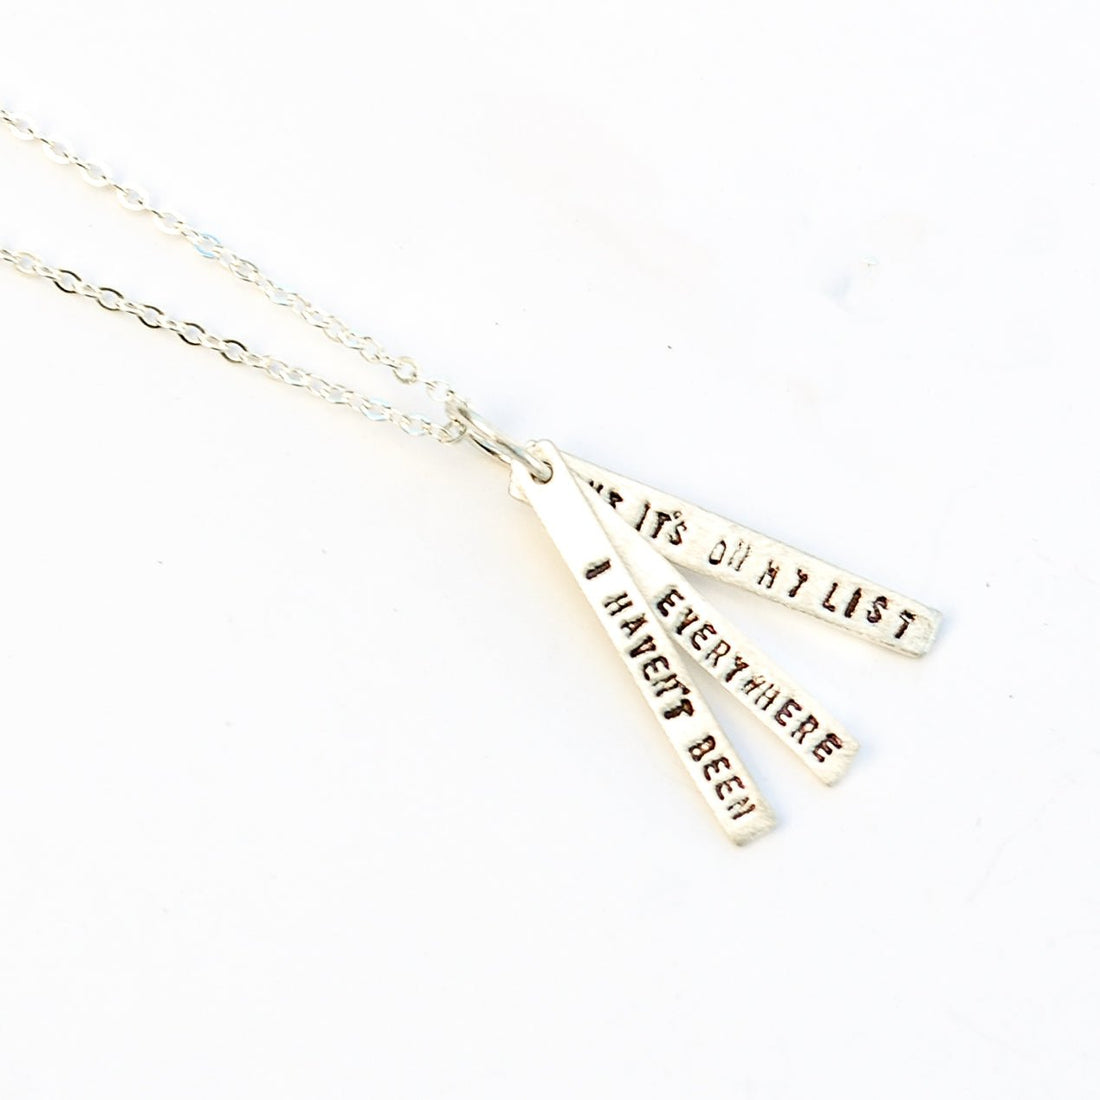 "I haven't been everywhere but it's on my list" -Susan Sontag quote necklace - Chocolate and Steel